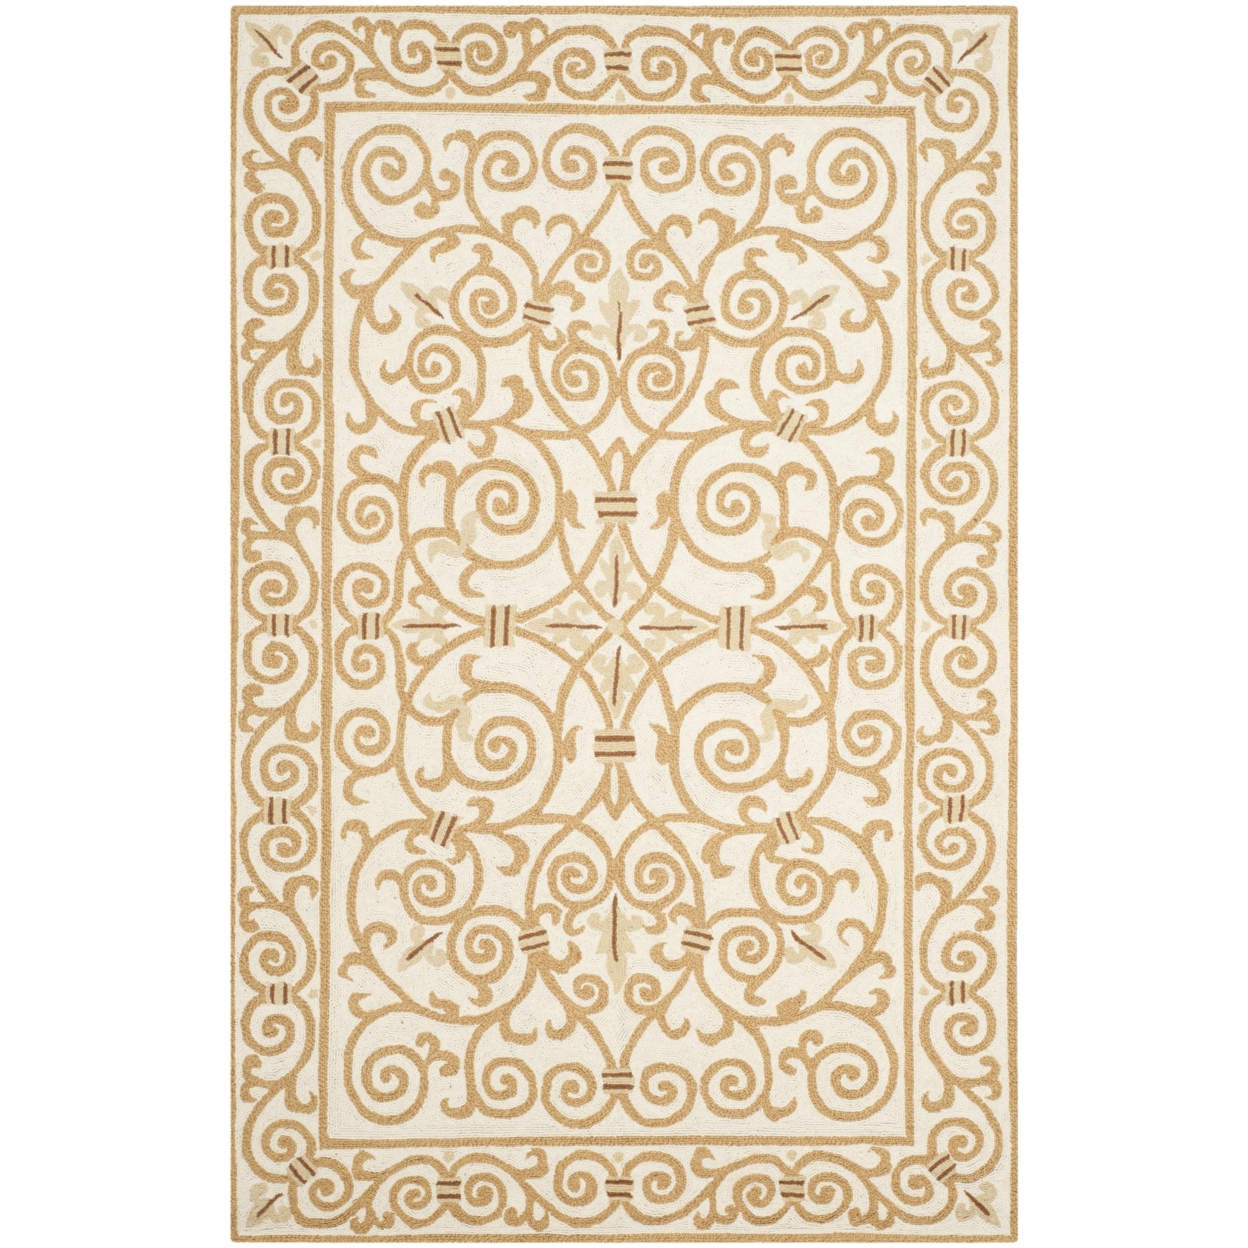 SAFAVIEH Chelsea HK11P Hand-hooked Ivory / Gold Rug - 4' 6 X 6' 6 Oval